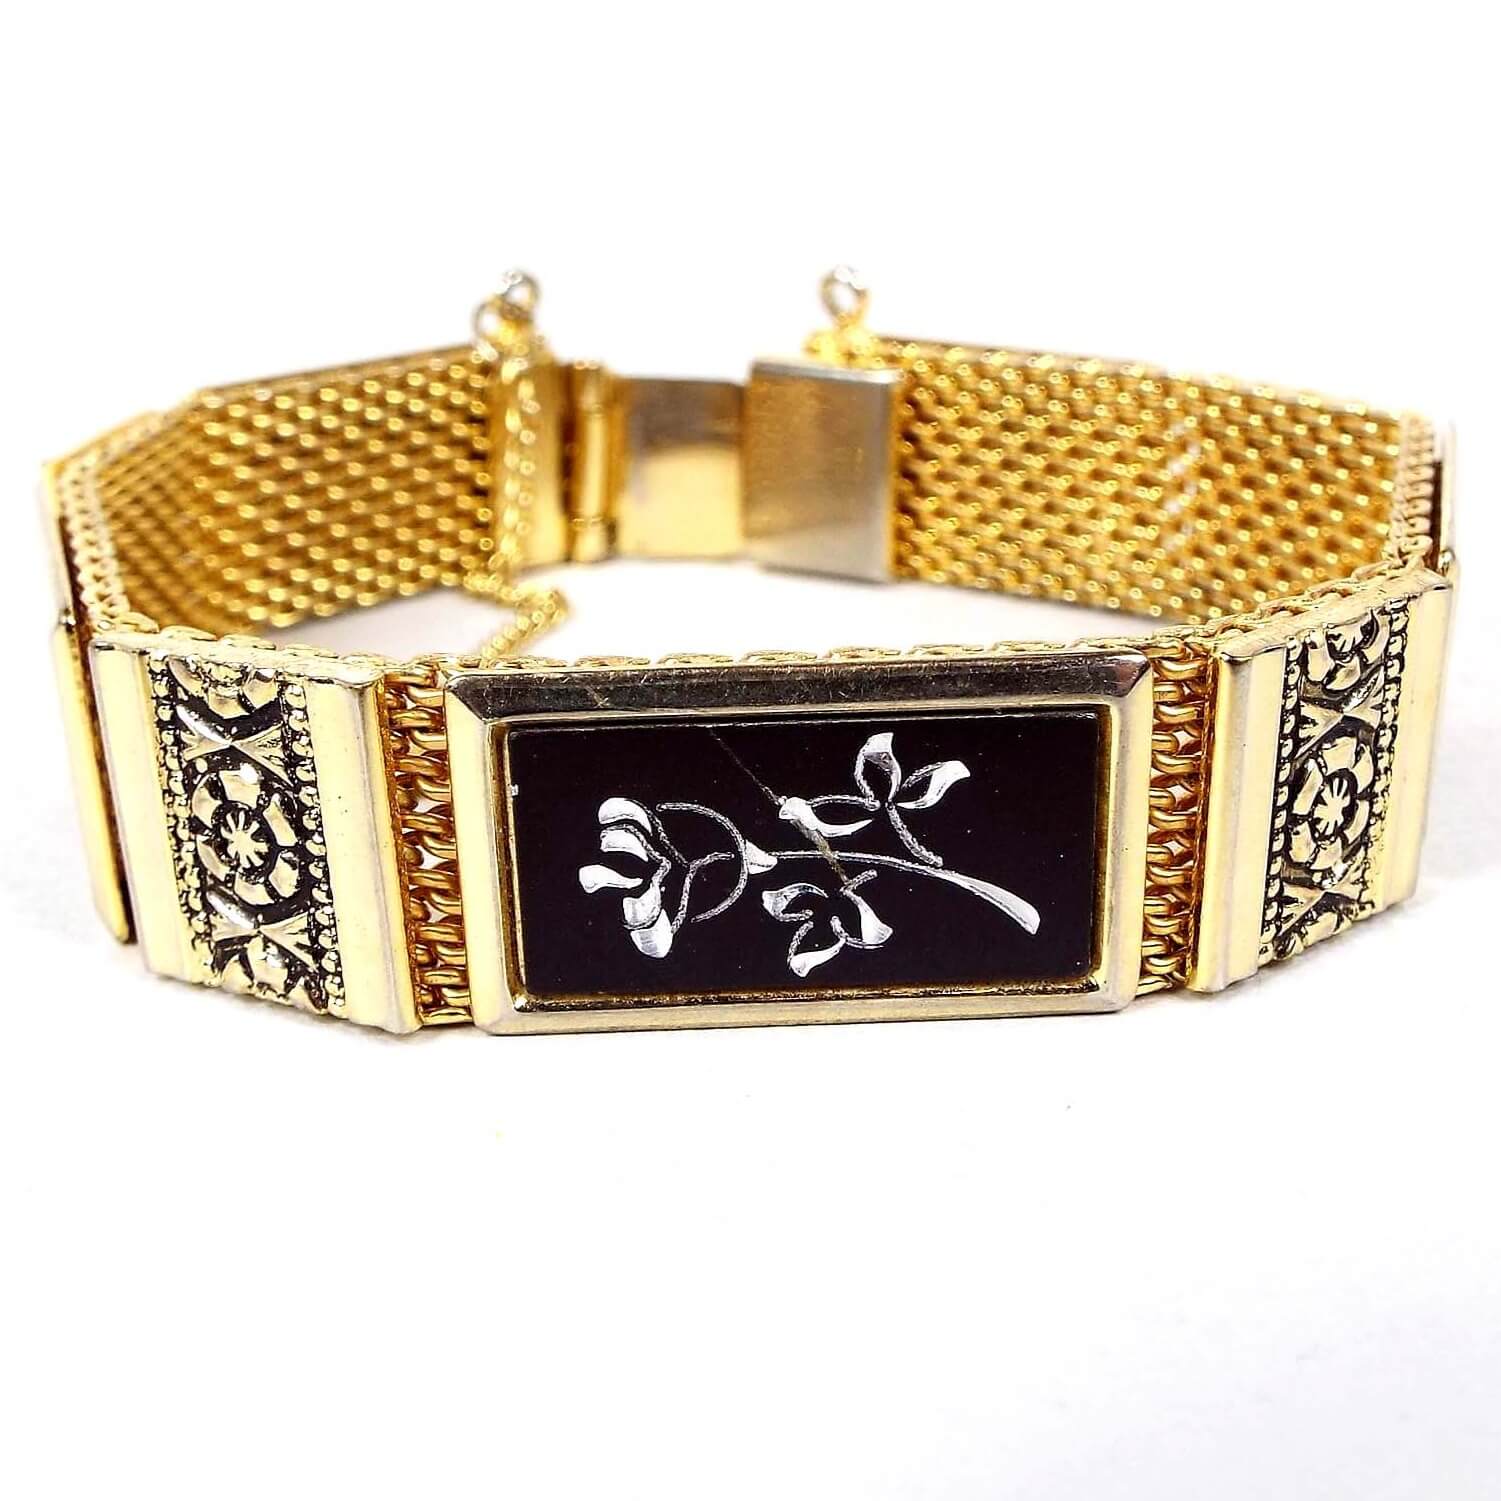 Front view of the Mid Century vintage Damascene style floral bracelet. It has a wide gold tone mesh setting with rectangle links. The smaller links have a flower design with a black background. The larger links are black with a silver tone color etched flower on them. there is a box clasp and a safety chain at the end.